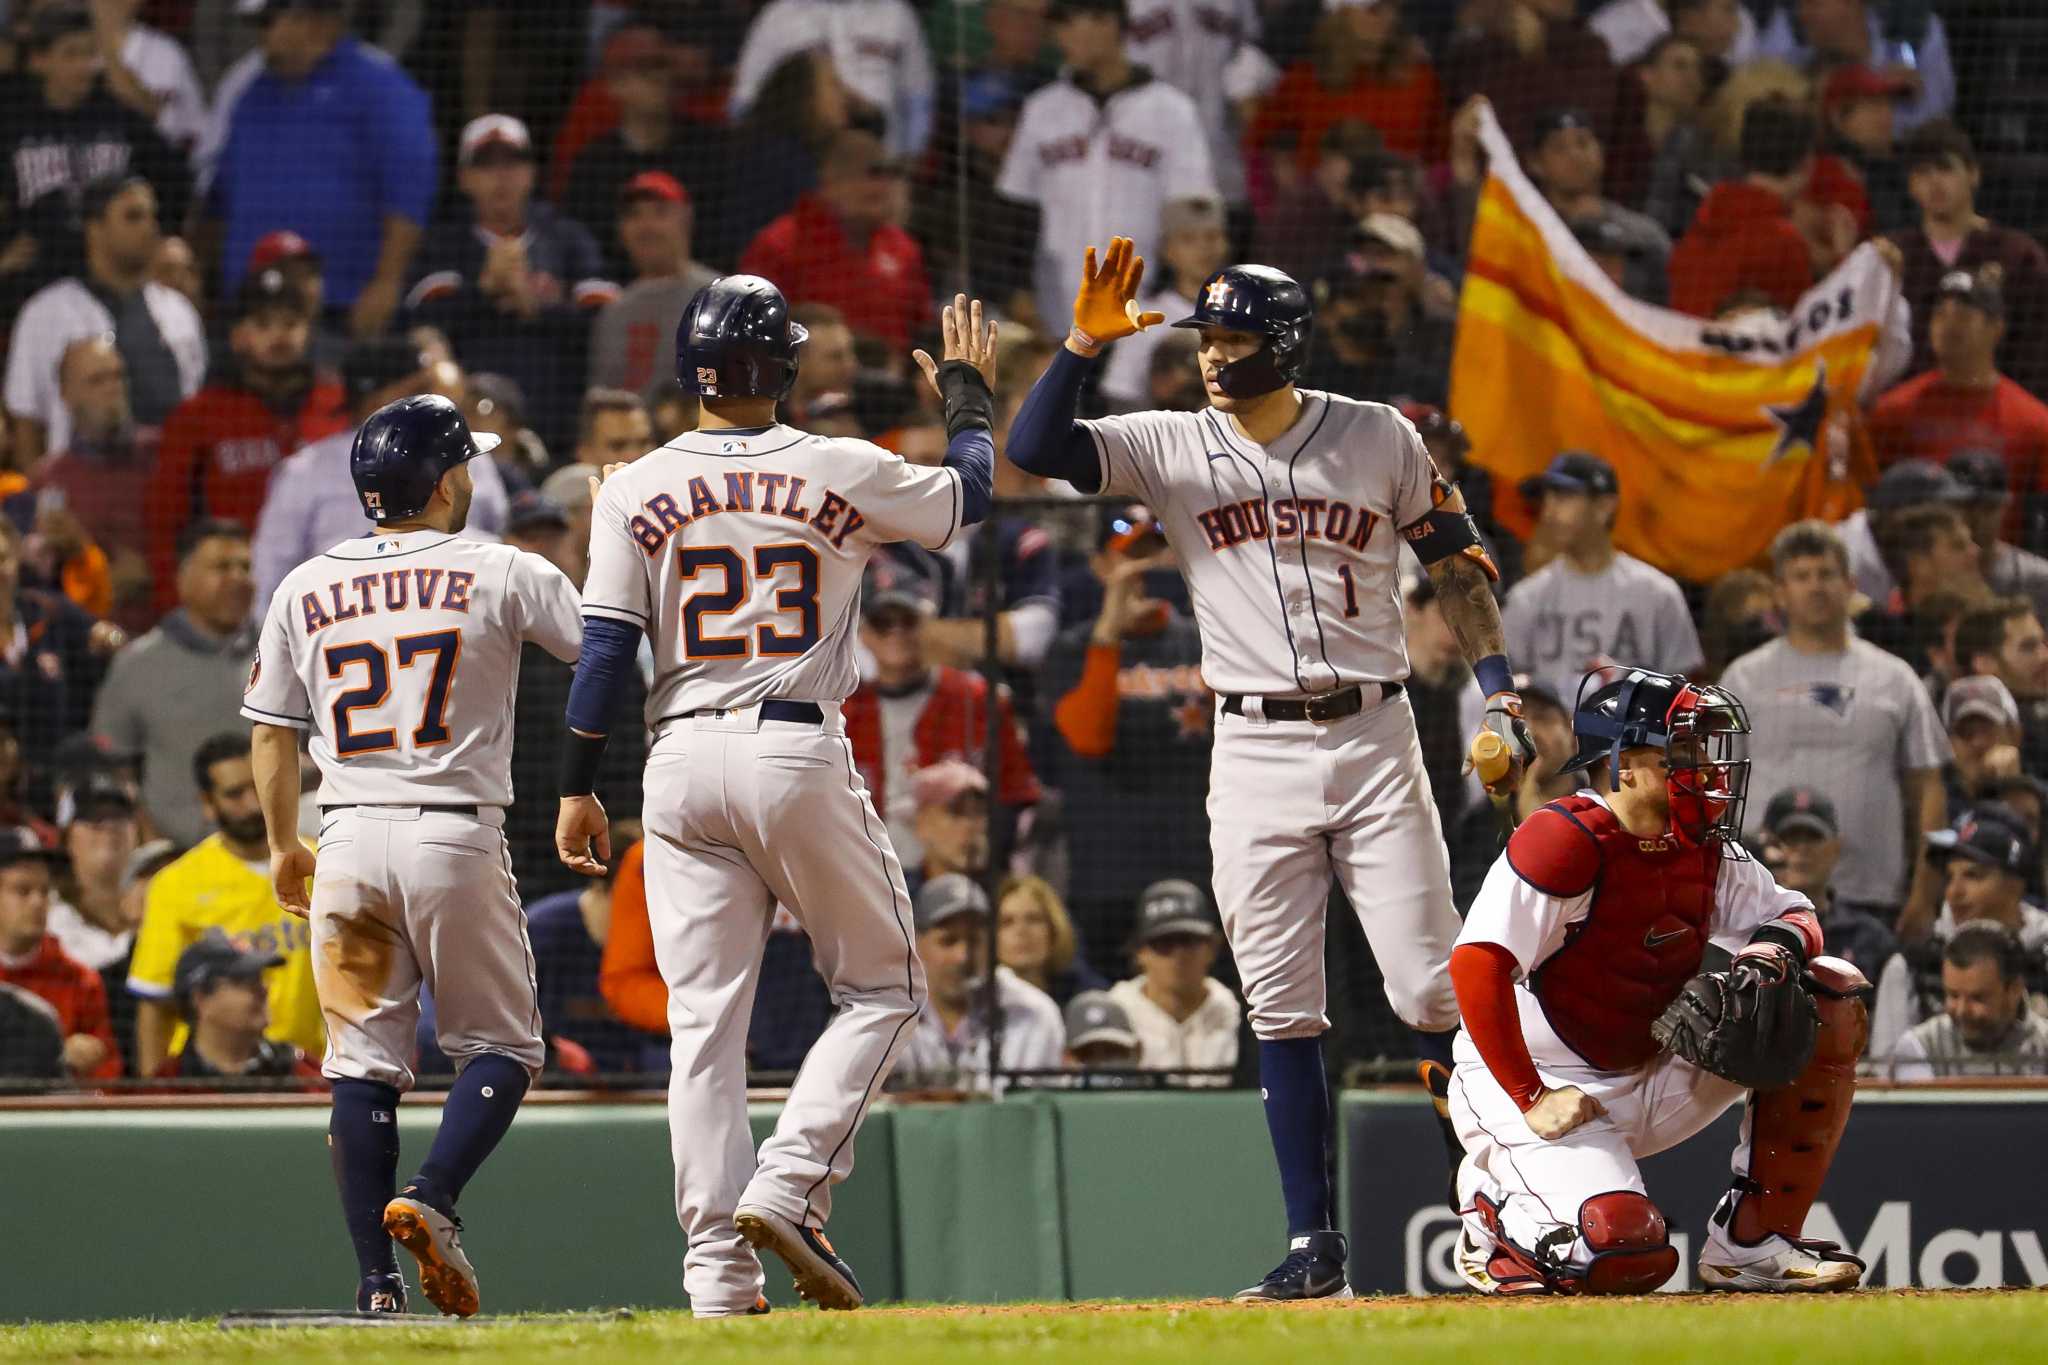 Houston, the team America loved to hate, fought to the end in the ALCS